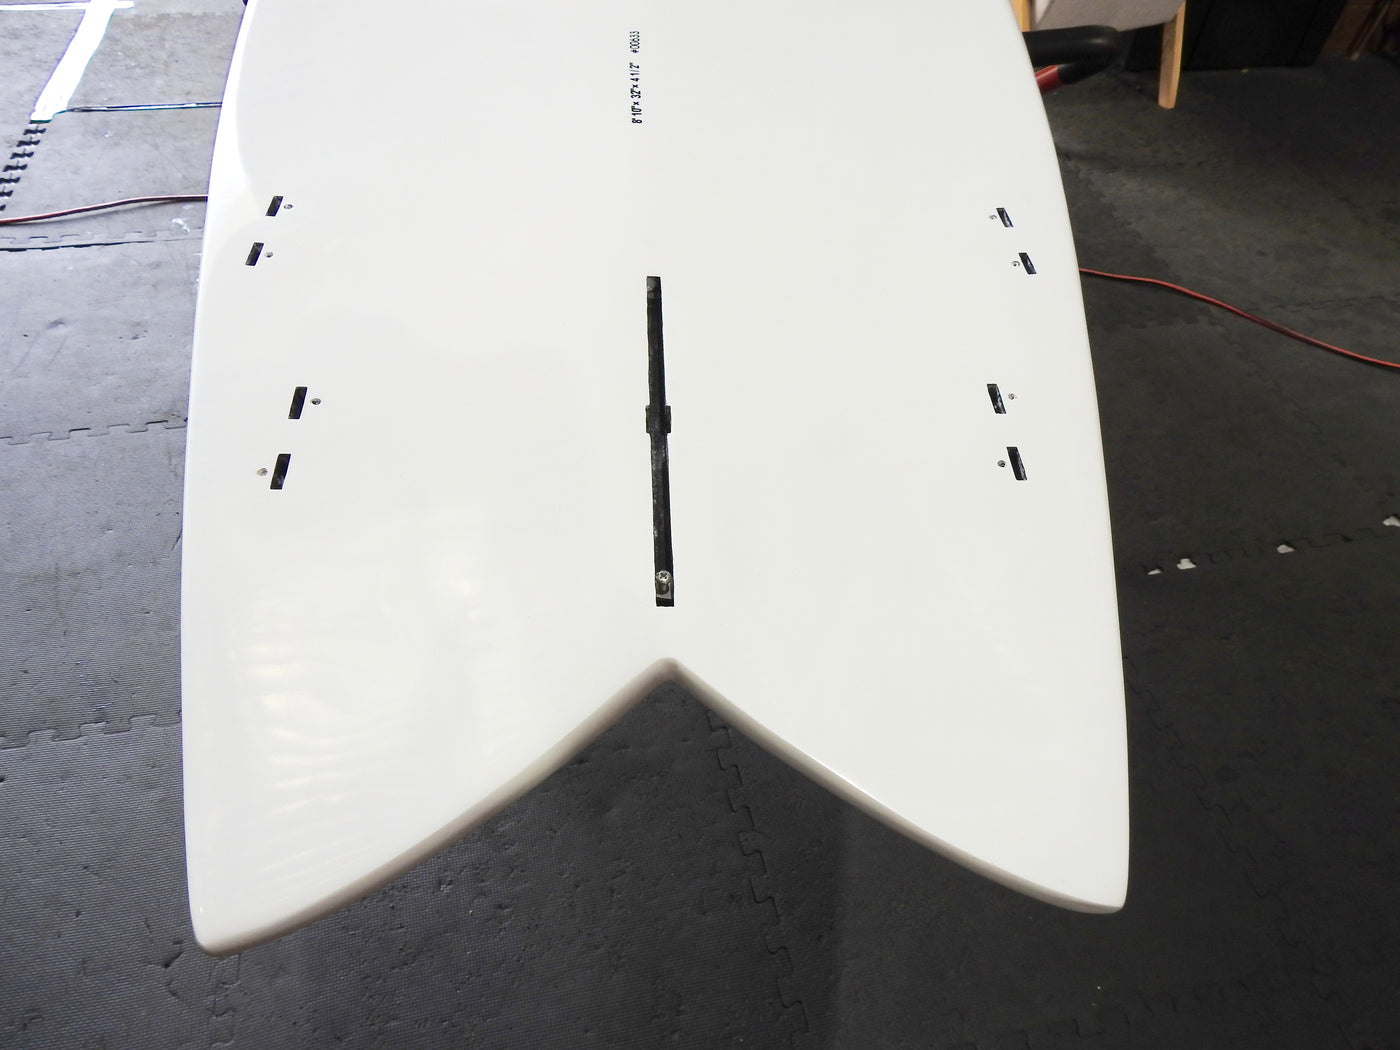 8’6” x 30” Galaxy Bounce Bamboo & White Surf SUP - Alleydesigns  Pty Ltd                                             ABN: 44165571264